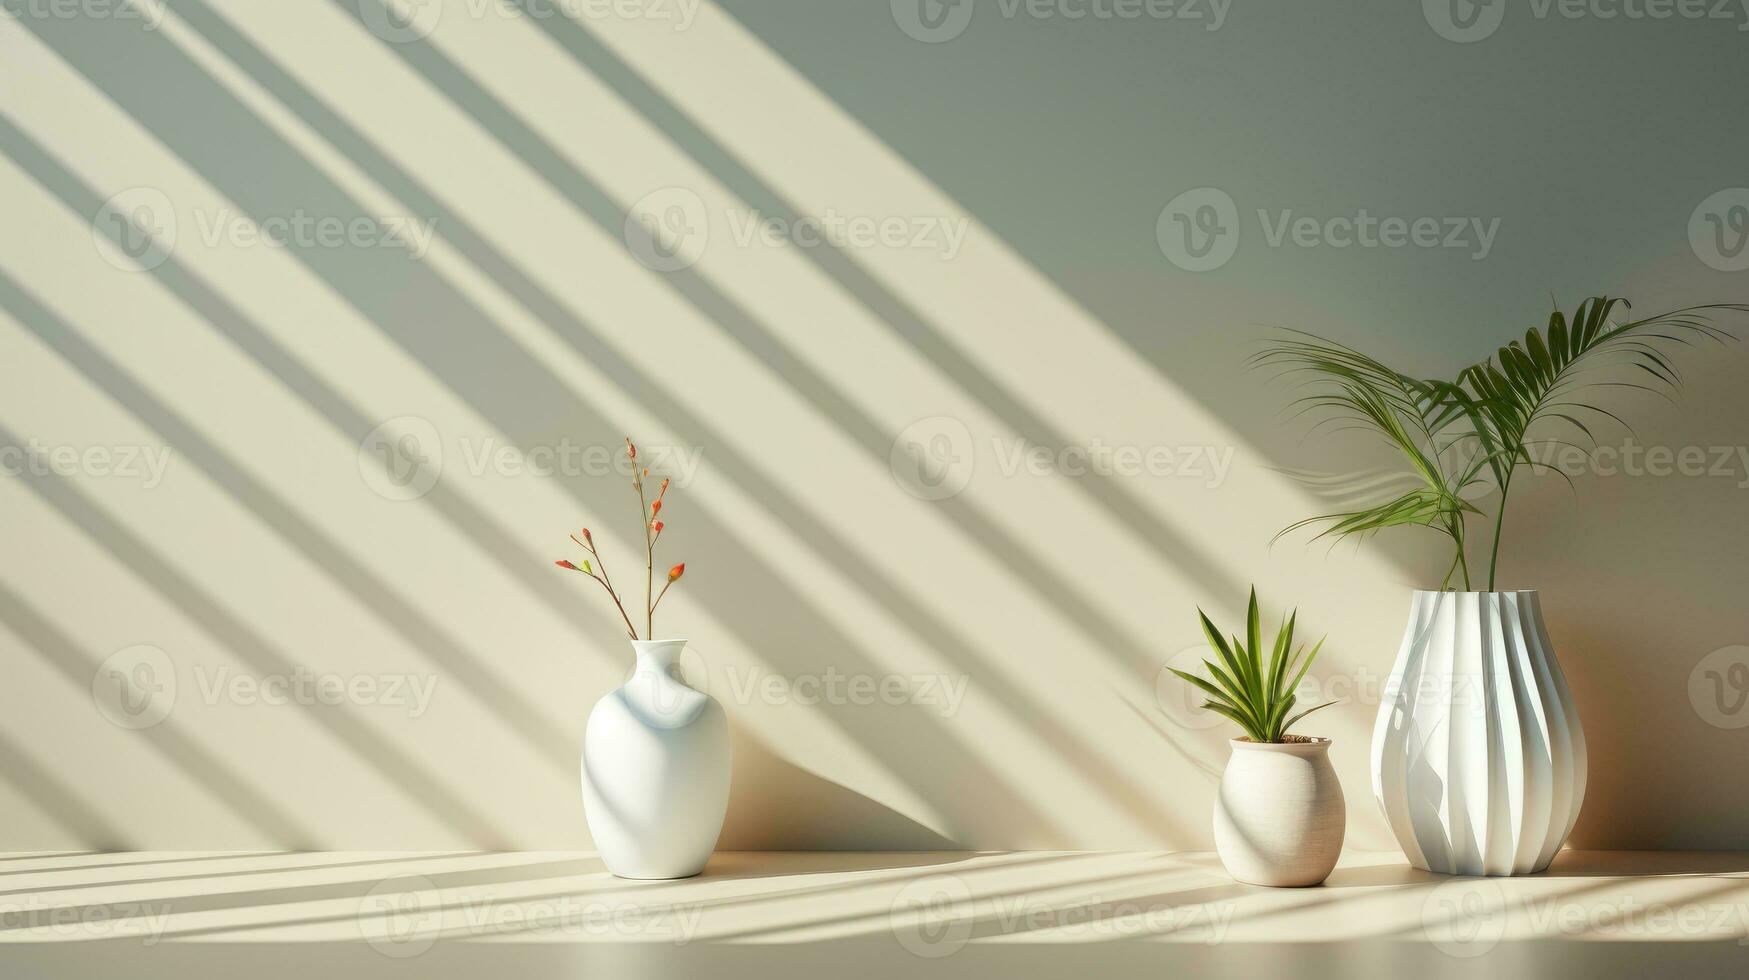 Warm Sunlight Casting Shadows on Room with Plants photo